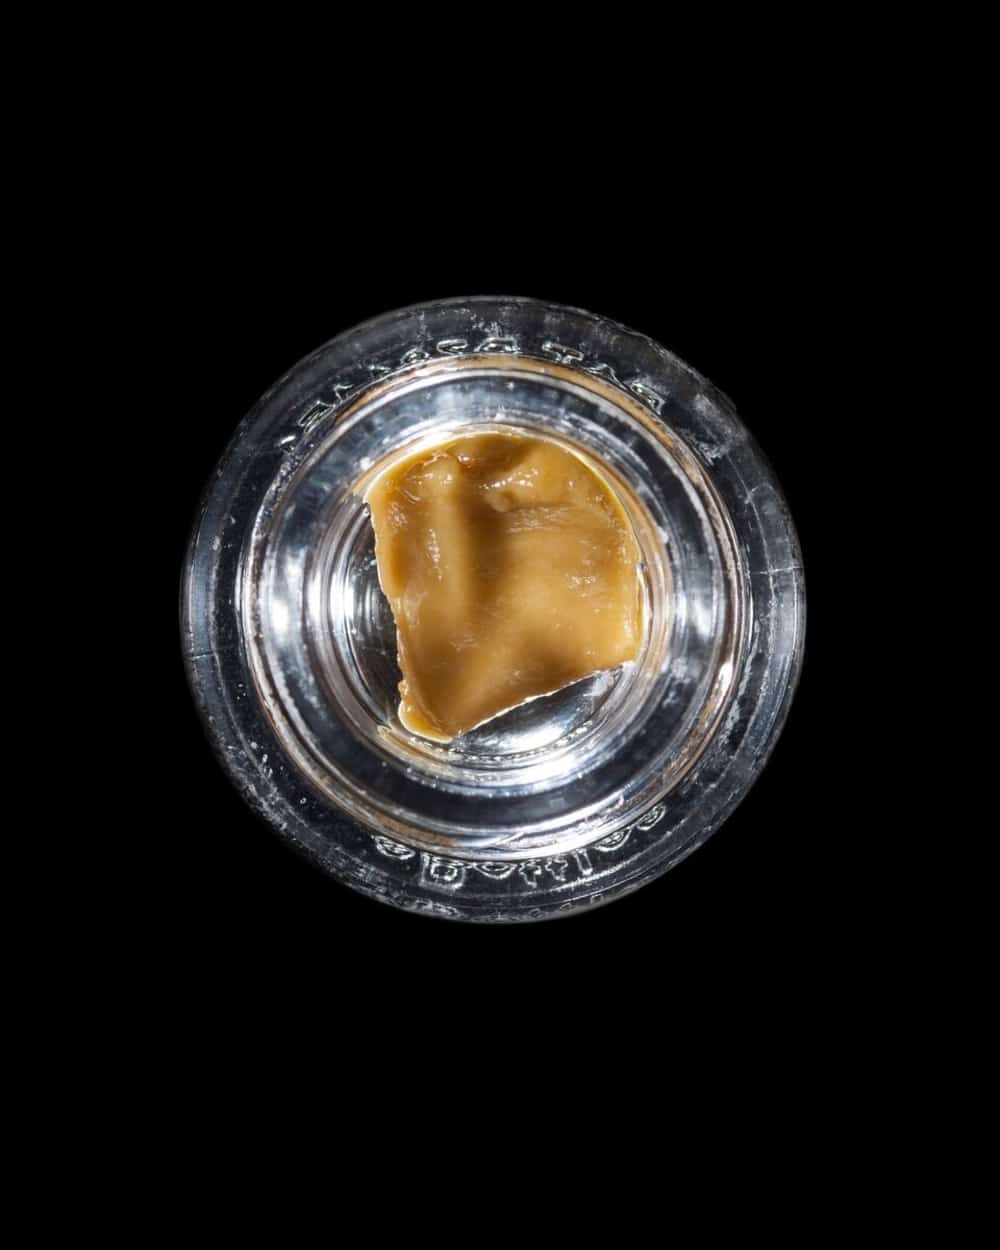 Winners of the 2018 SoCal Cannabis Cup